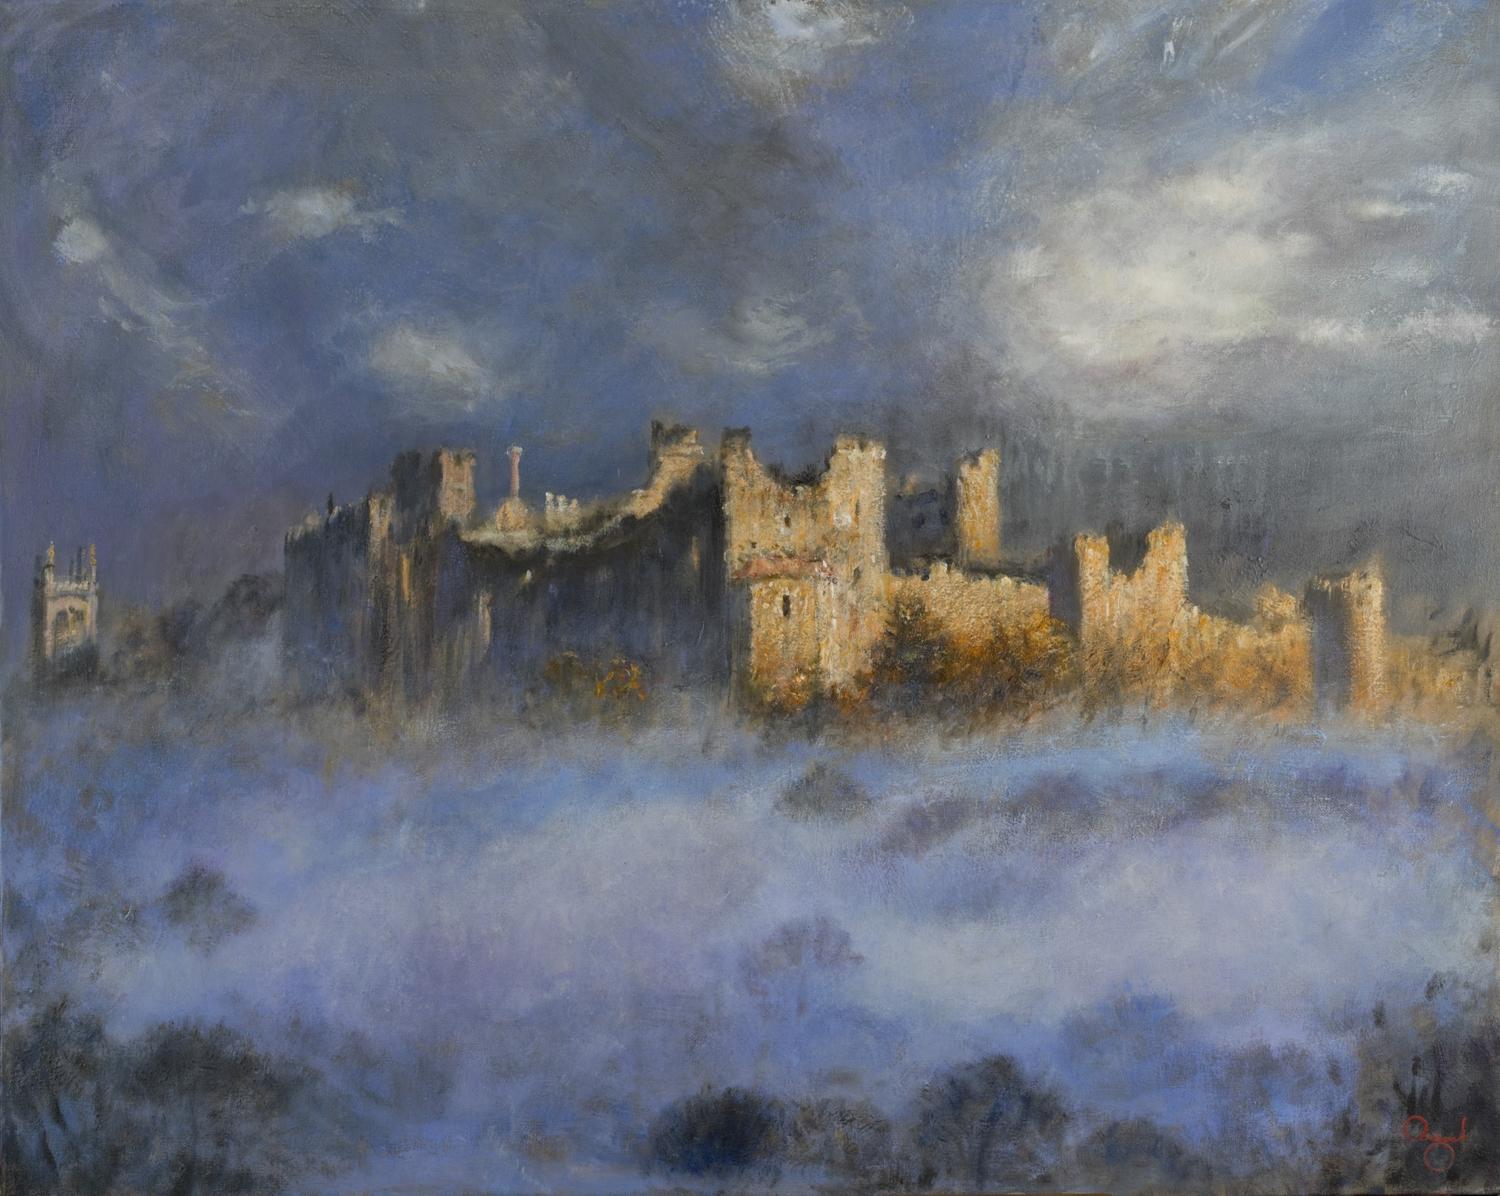 Rene Legrand Landscape Painting - Large Oil of Ludlow Castle, Shropshire misty scene, stormy sky church in view